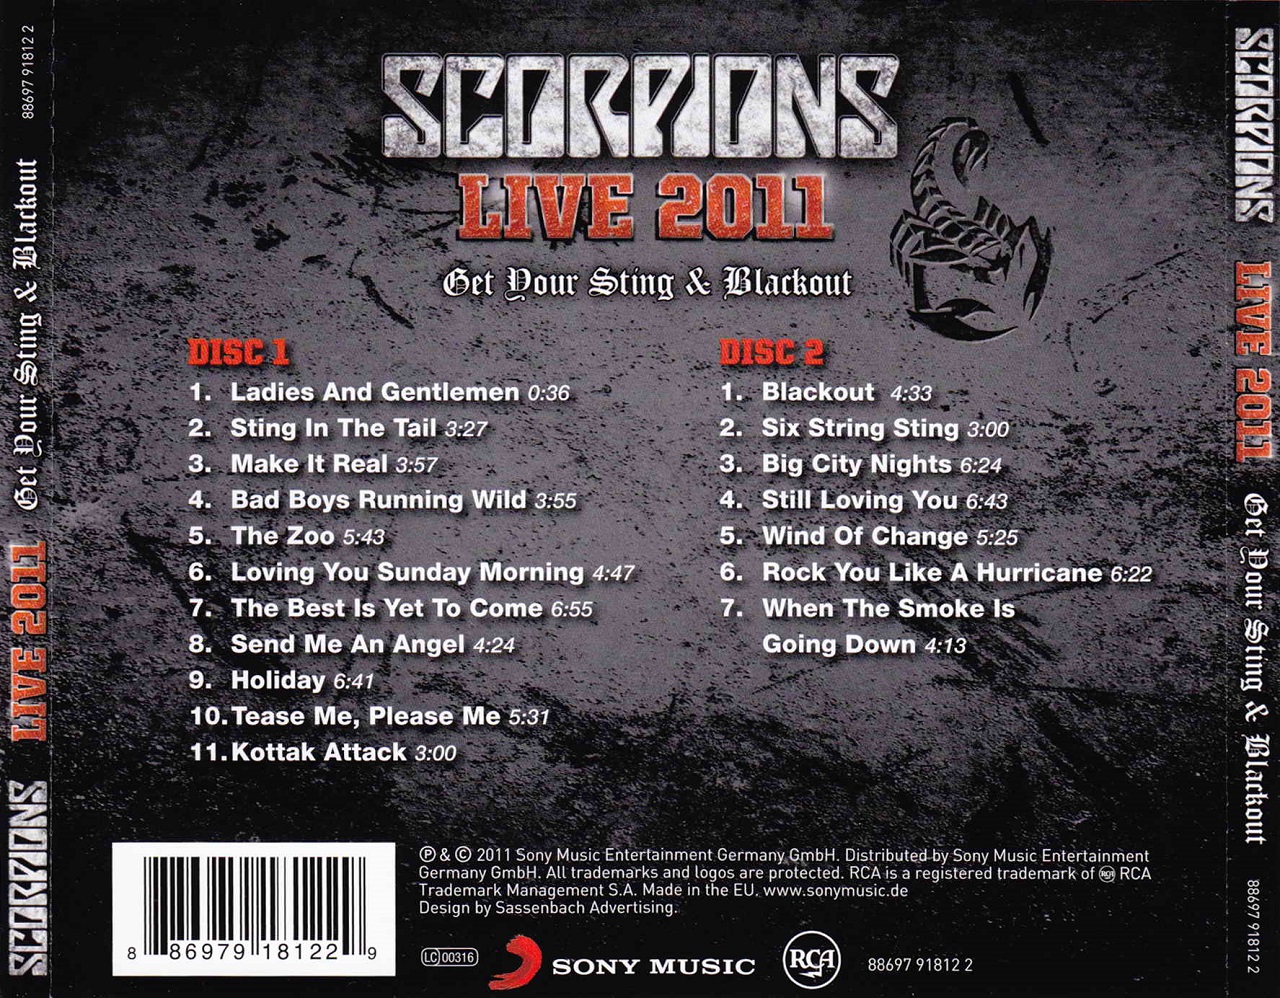 Scorpions flac. Live 2011: get your Sting & Blackout. Scorpions Blackout обложка. DVD обложка Scorpions - Blackout. Scorpions Live 2011 обложка альбома.